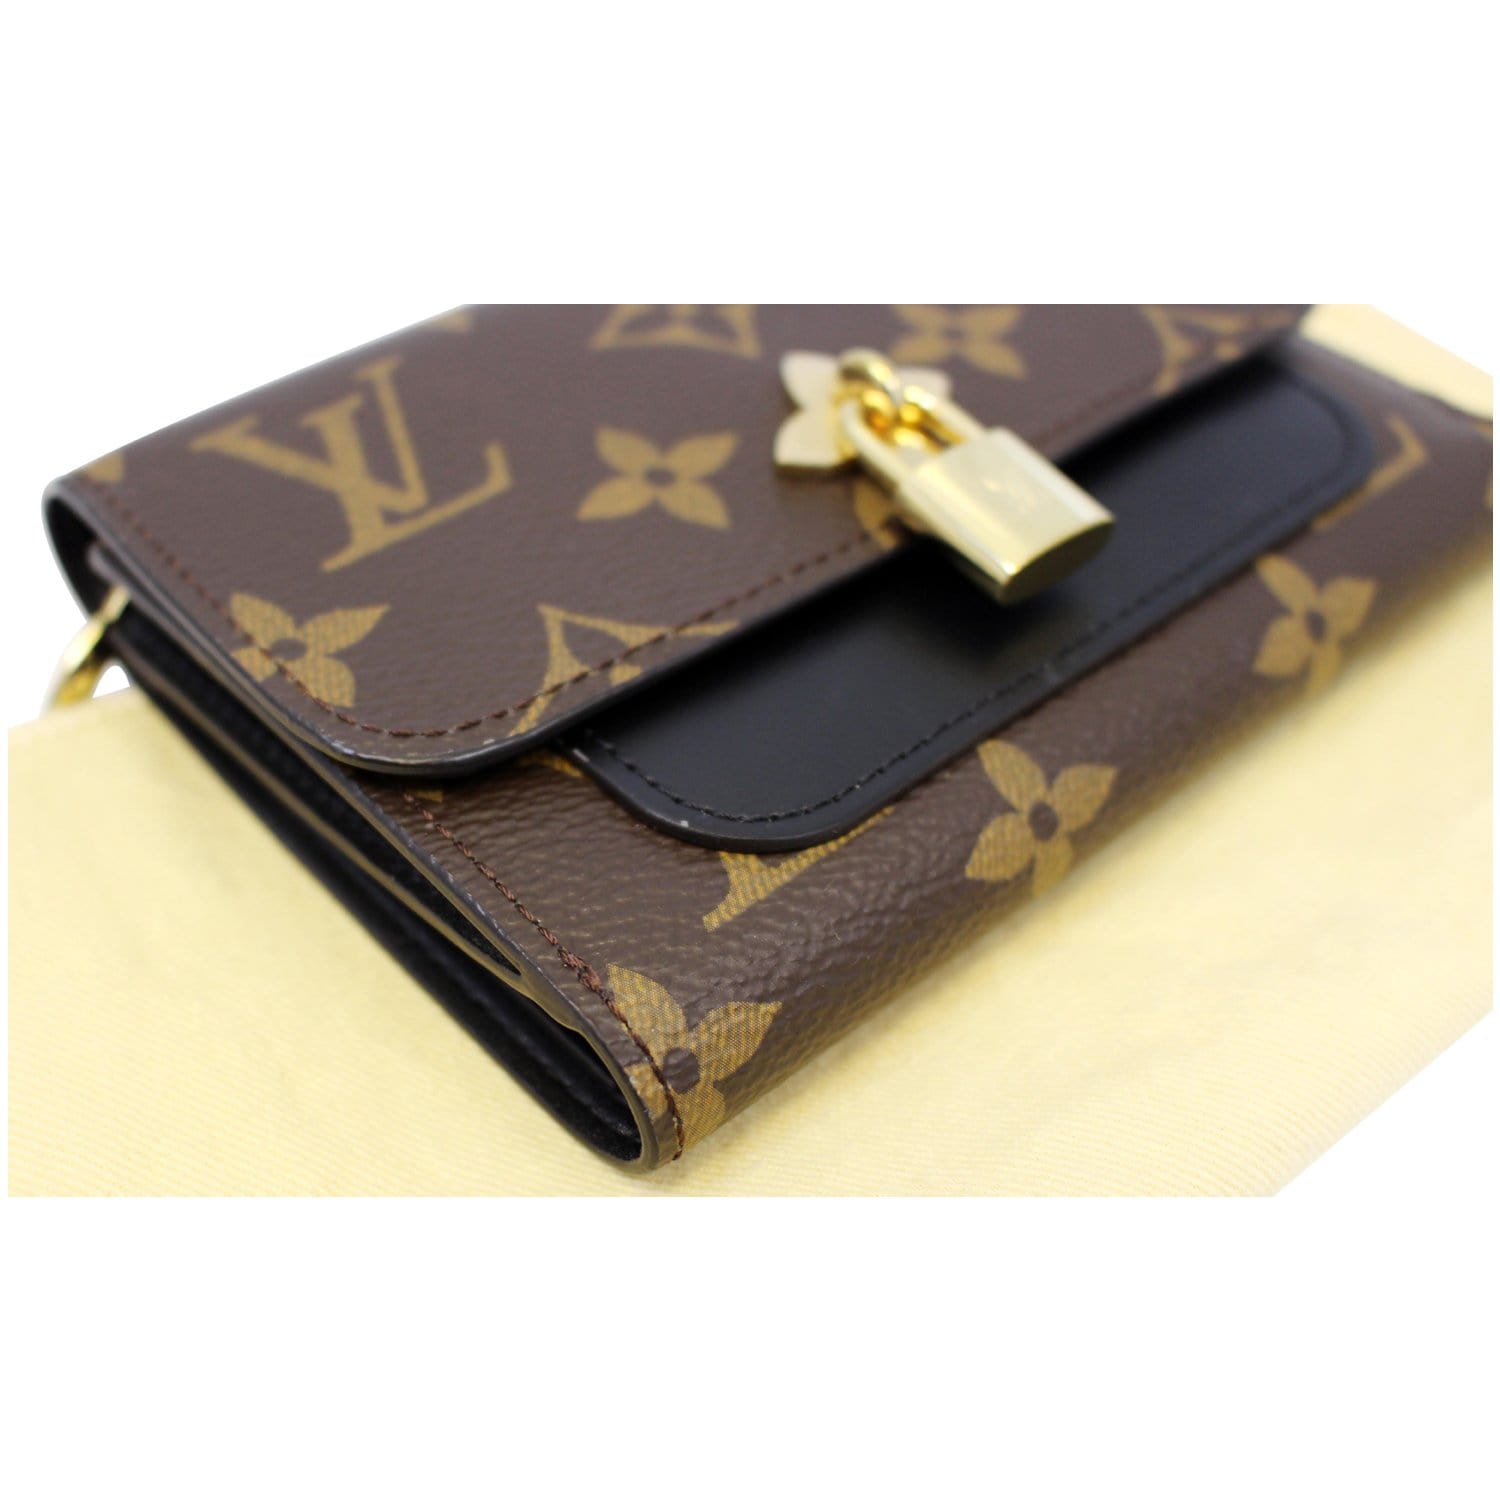 lv wallet with flower